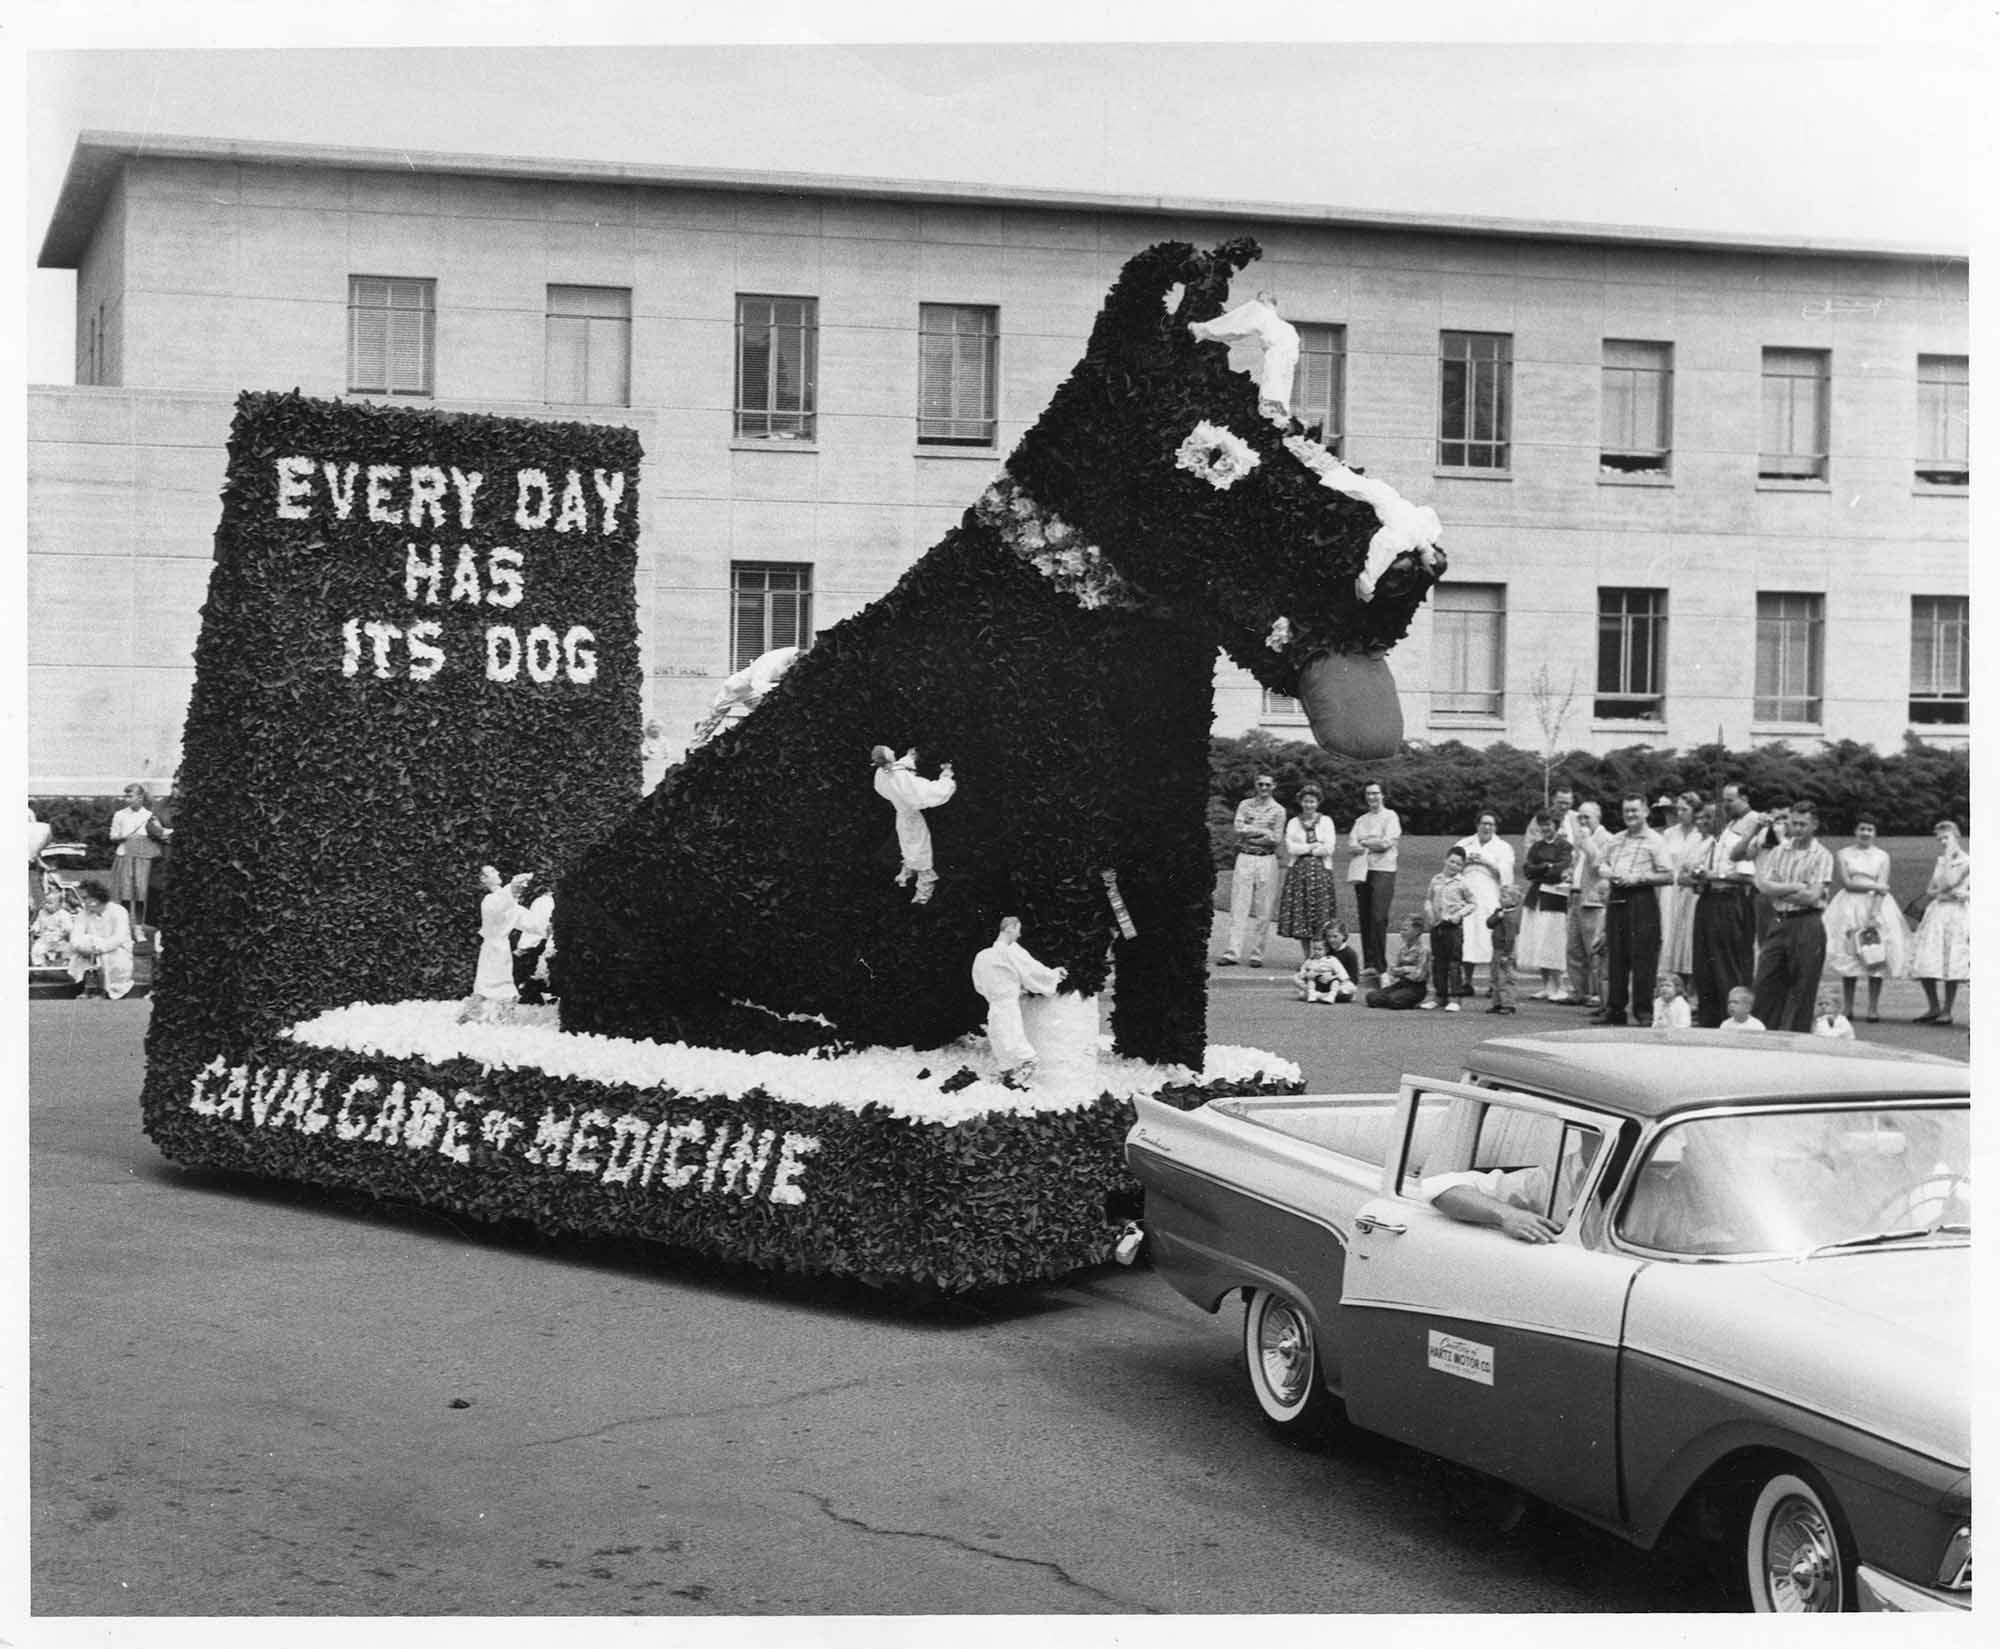 Black and white photo of parade float with dog and text: Every day has its dog